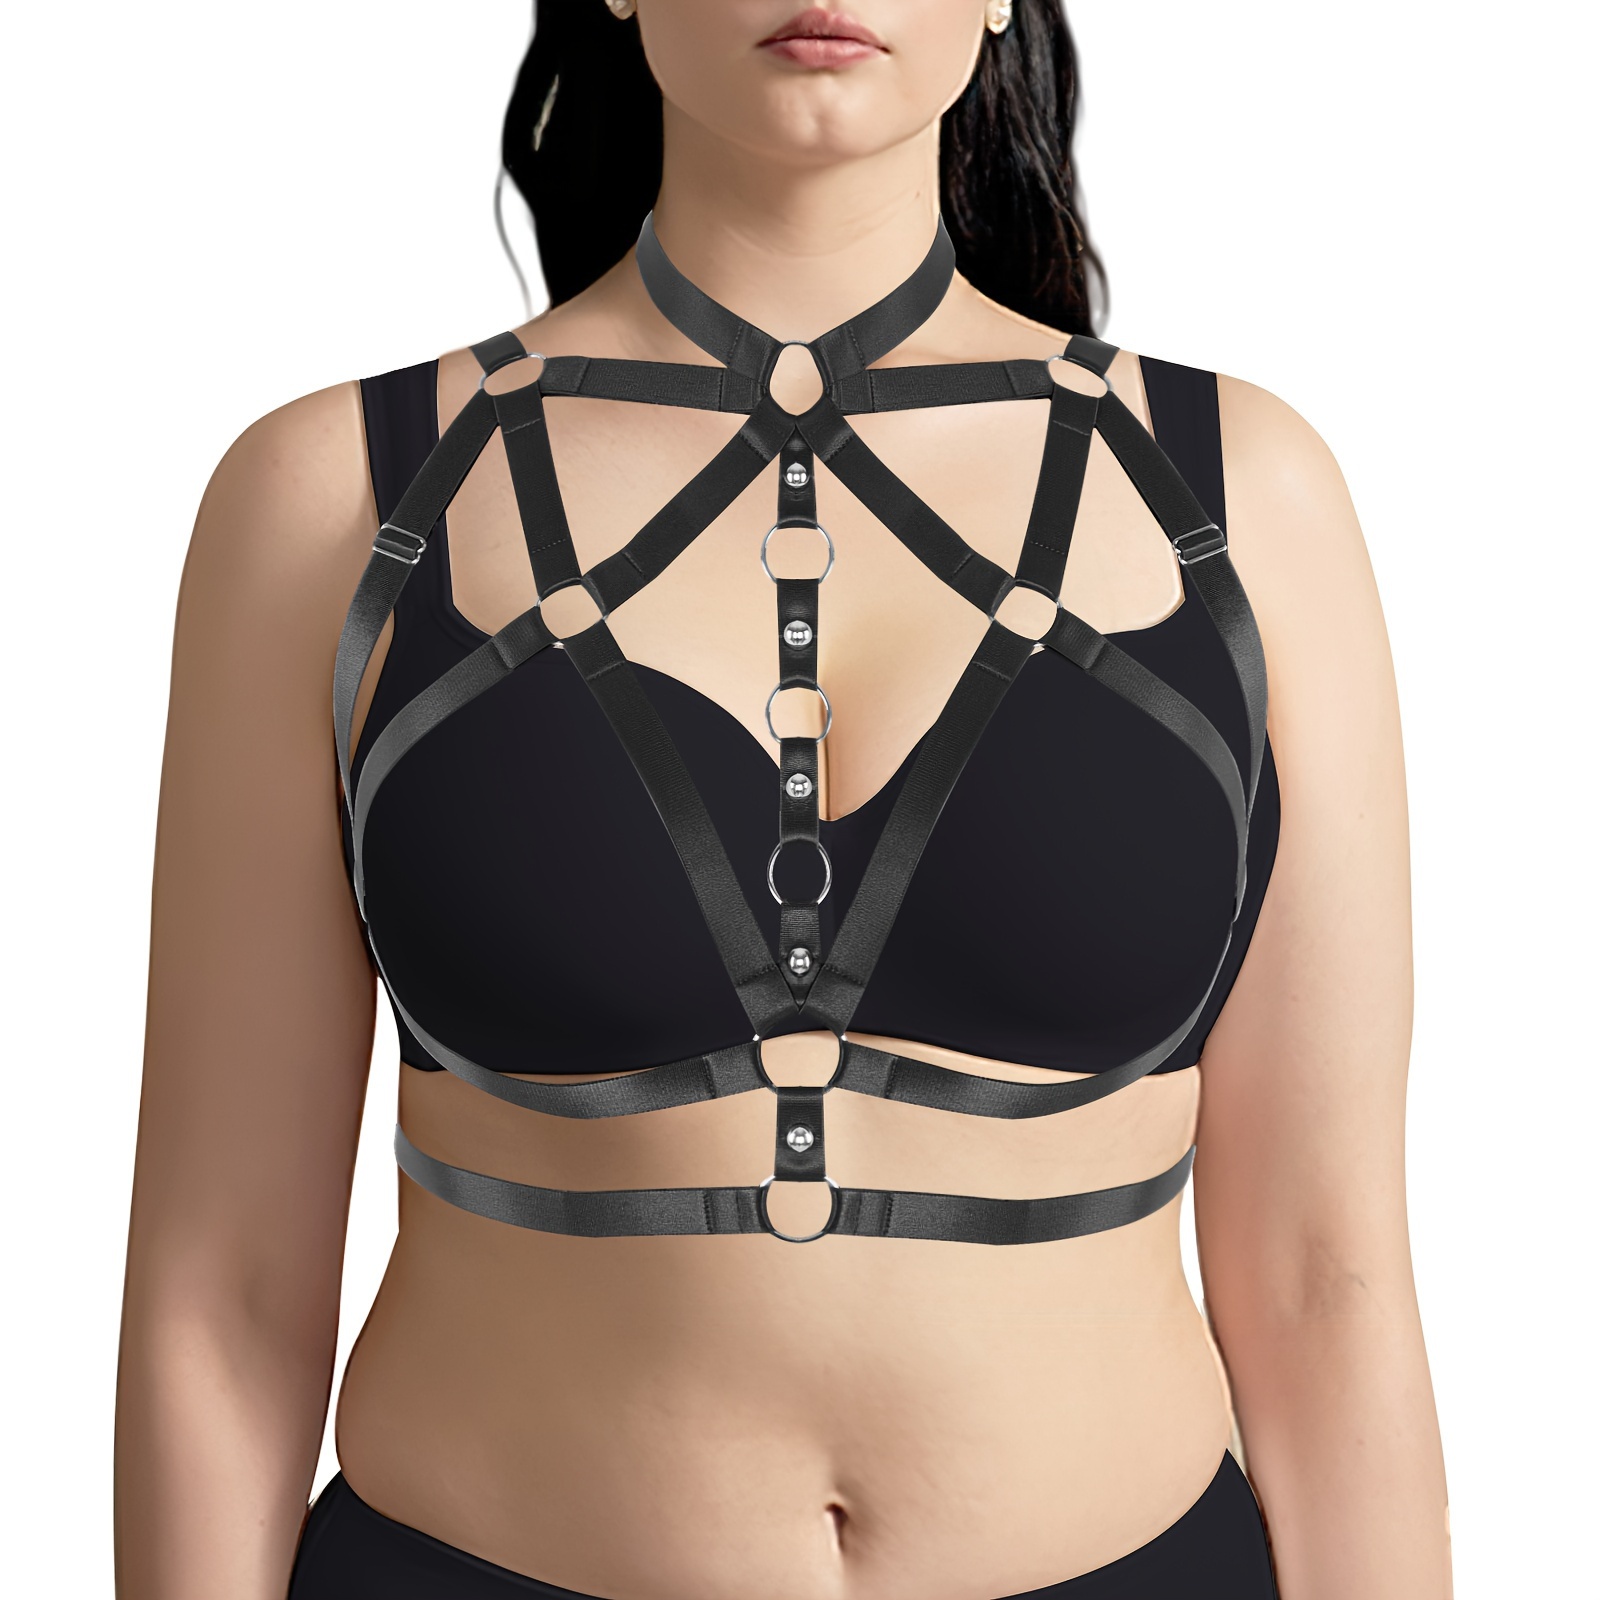 Womens Faux Leather Cupless Cage Bra Harness Push Up Underwire Bra Tops  Lingerie Bralette